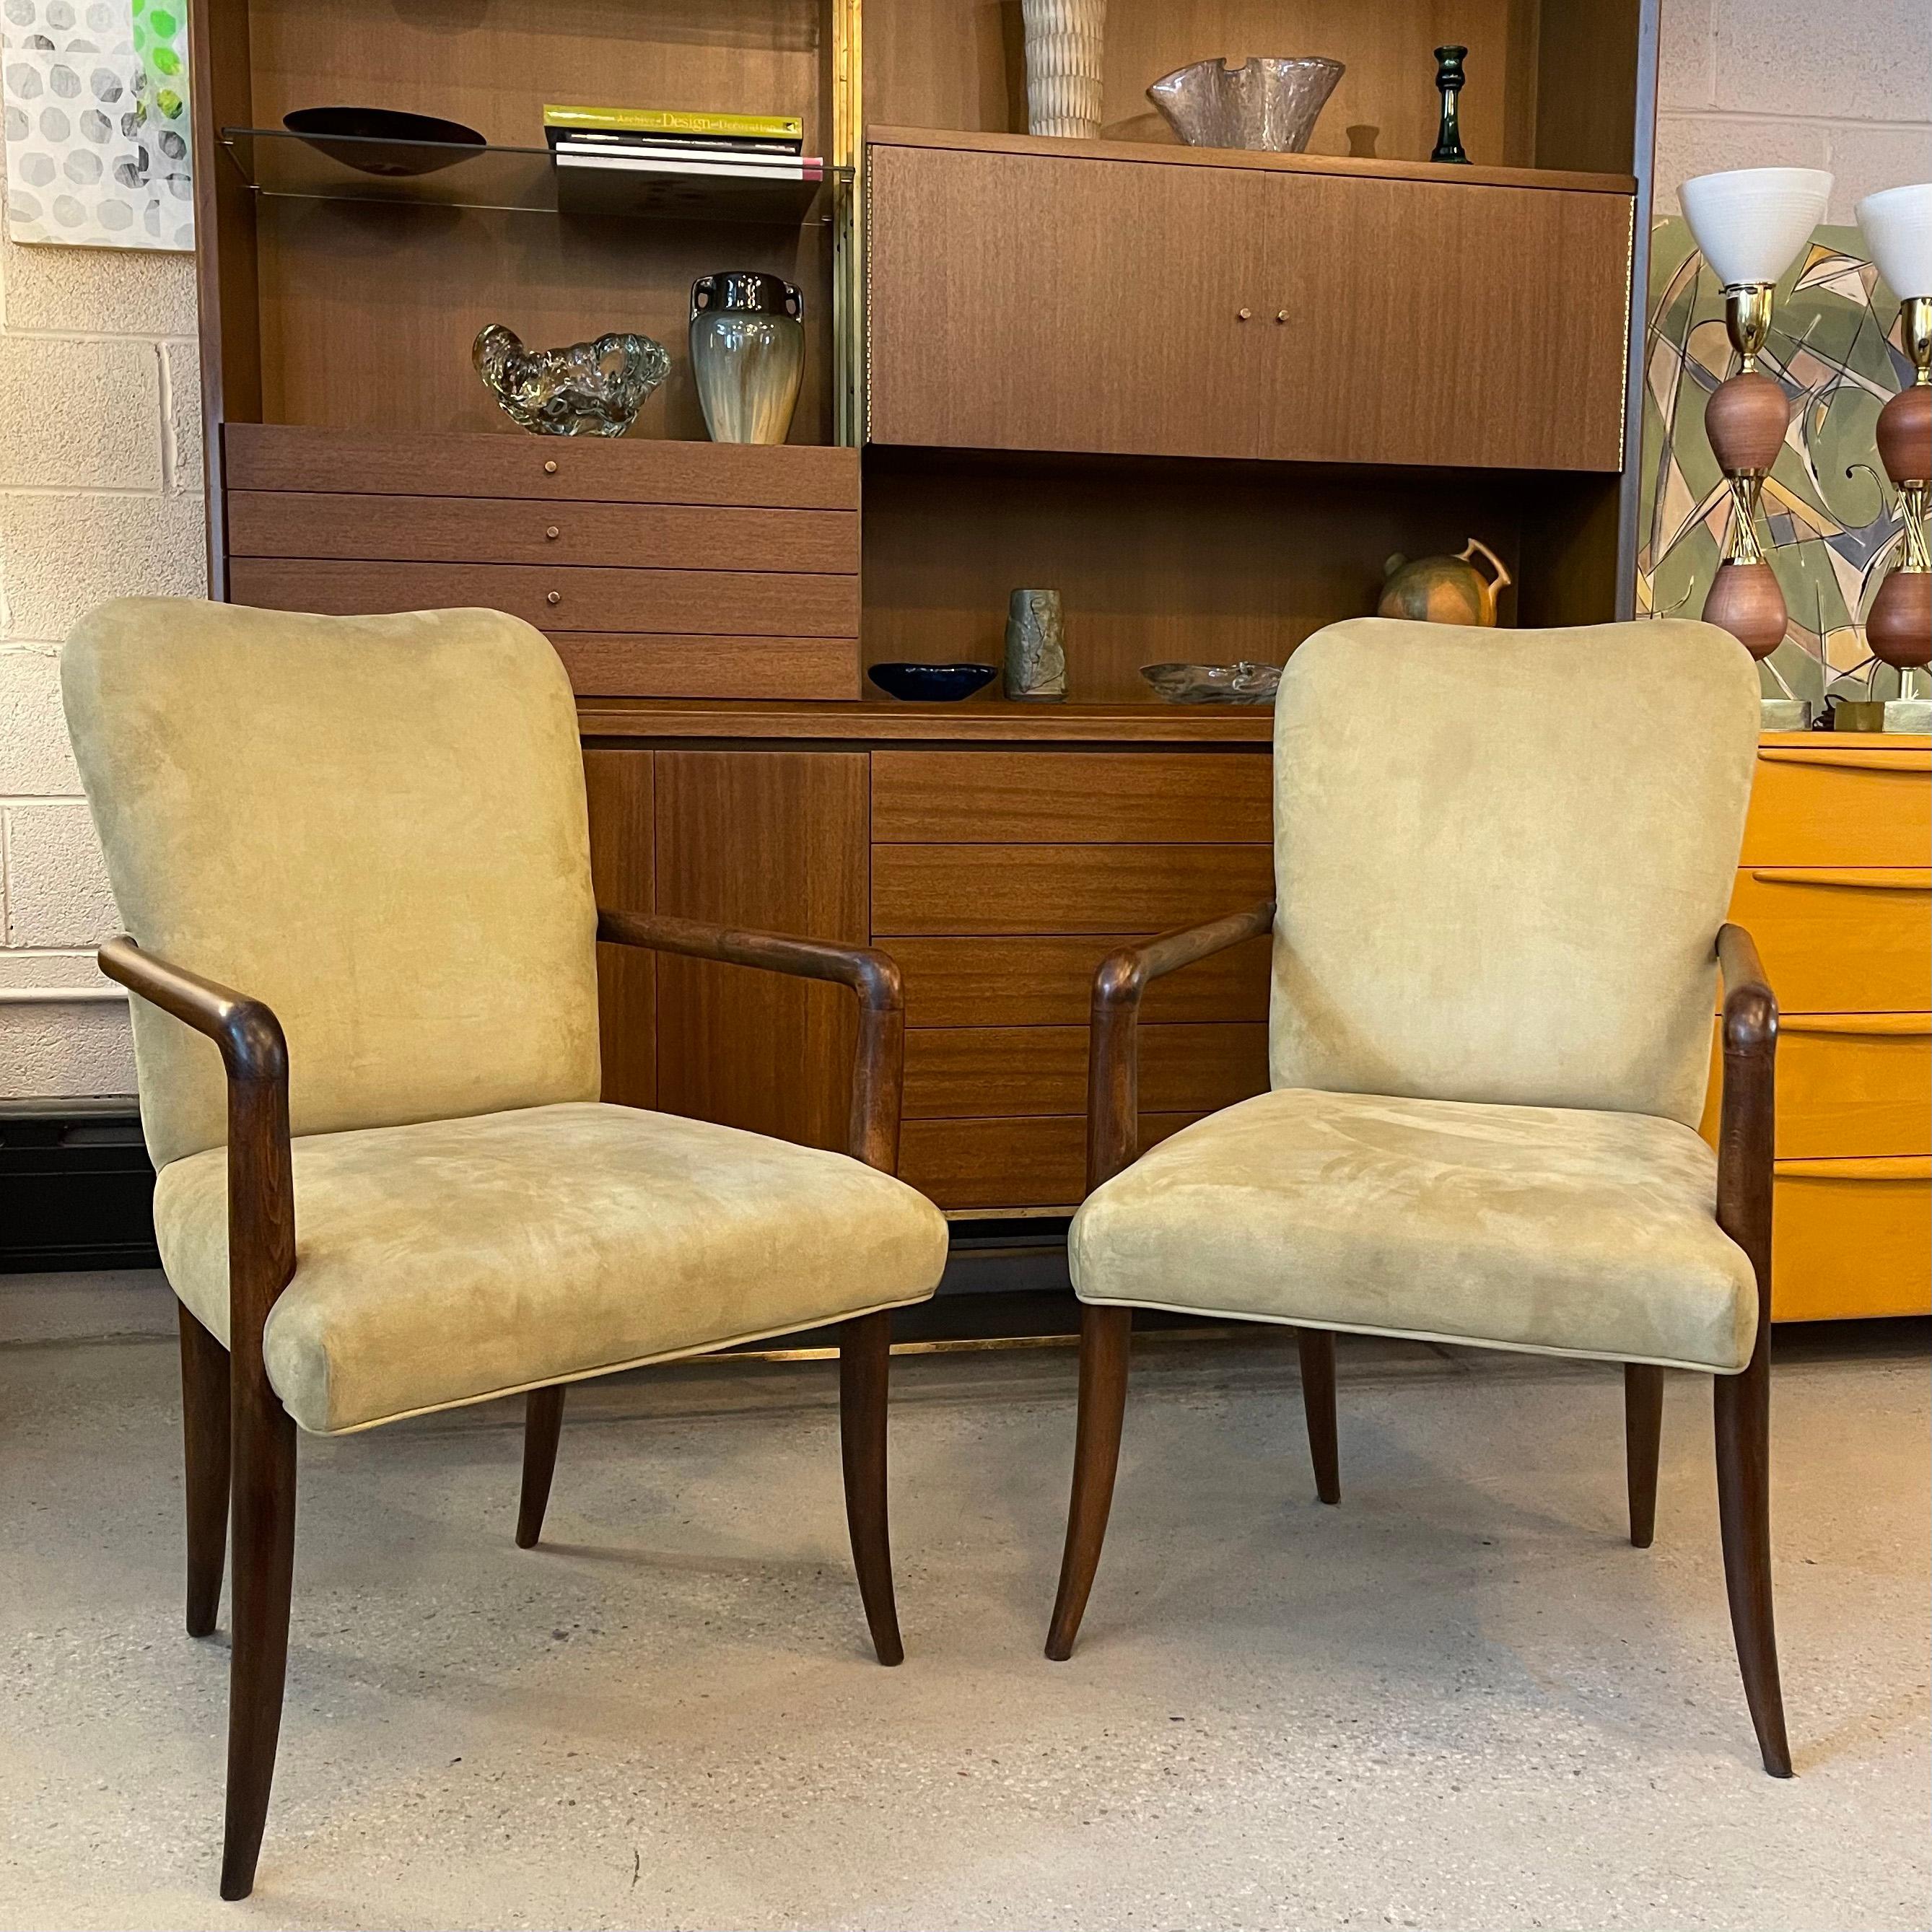 Pair of stately, mid-century modern armchairs feature tannish celadon ultrasuede upholstery with high, sweetheart backs and slender oak arms and sabre legs. A truely elegant seating pair that compliments any setting or decor.  